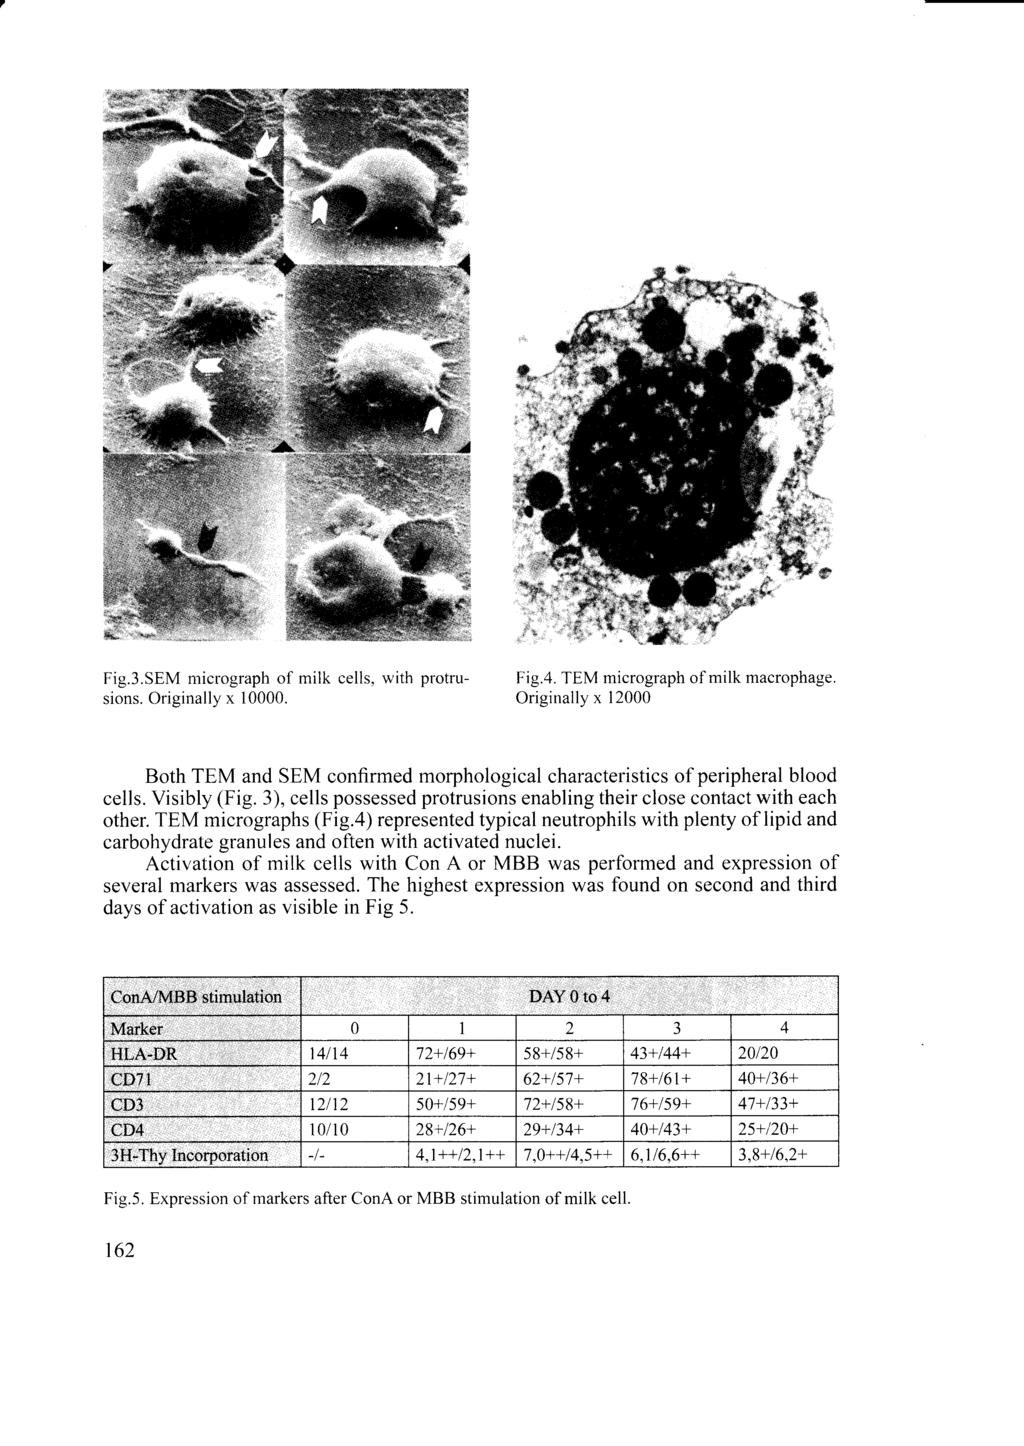 Fig.3.SEM micrograph of milk cells, with protru- Fig.4. TEM micrograph of milk macrophage, sions. Originally x 10000.